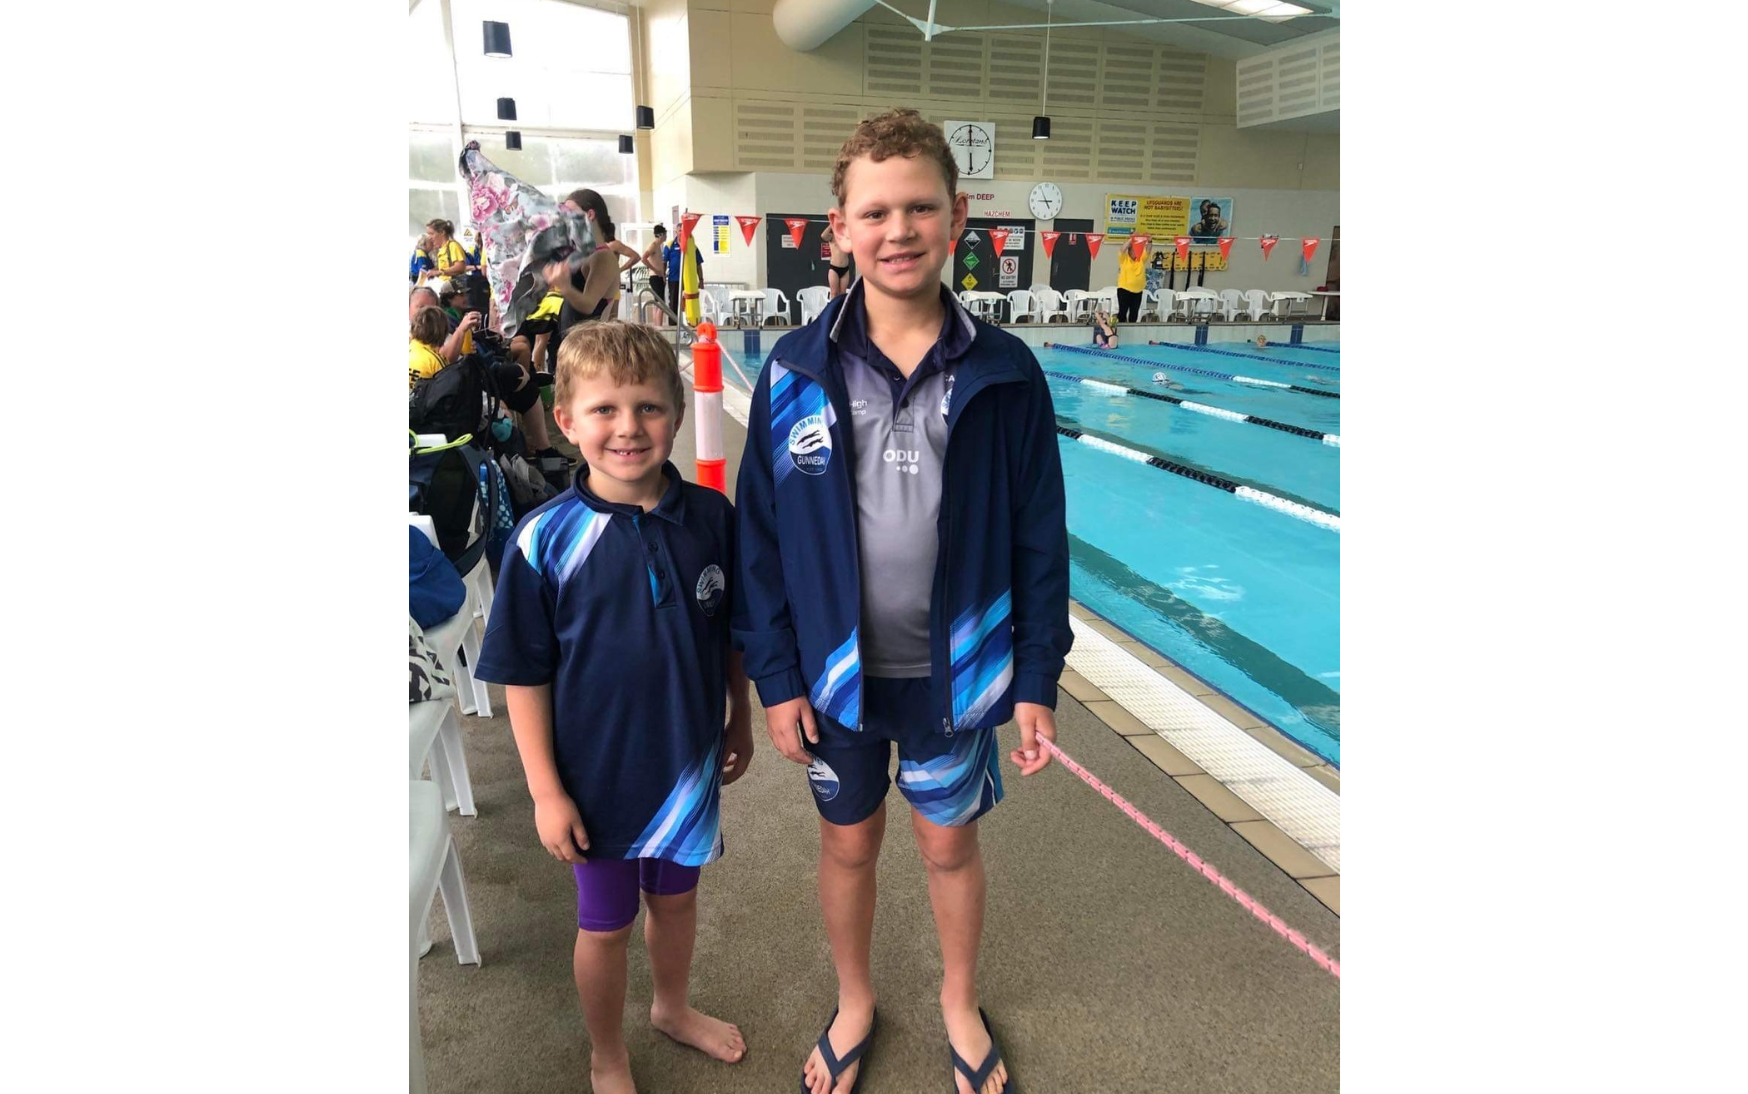 Sills brothers snap up medal wins ahead of home carnival